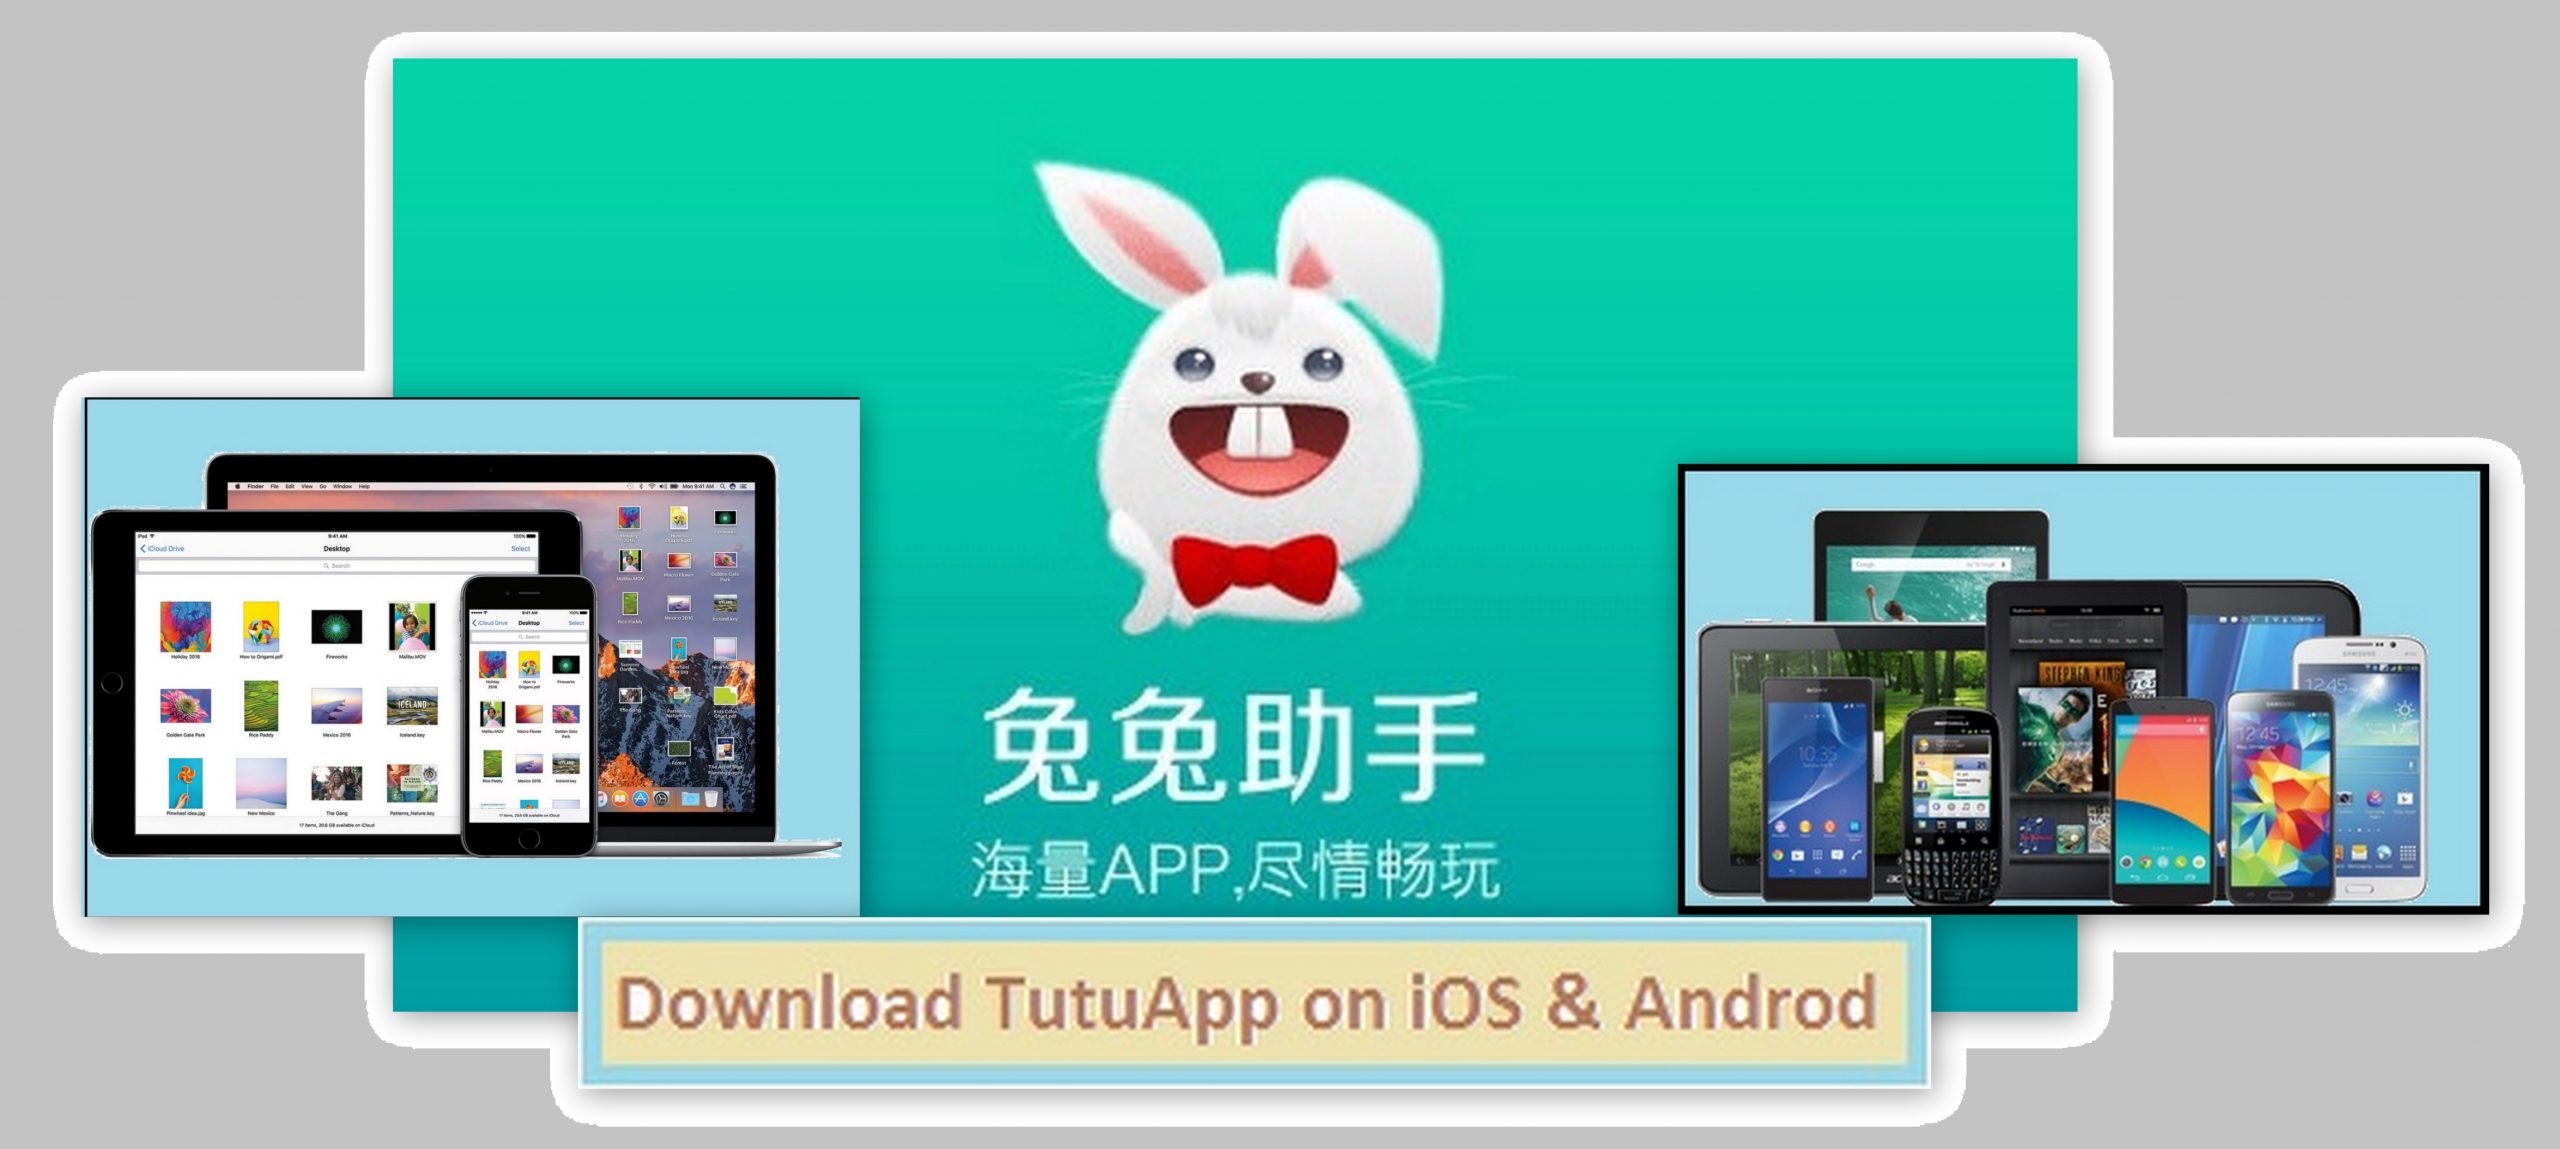 Download TutuApp on iOS & Android